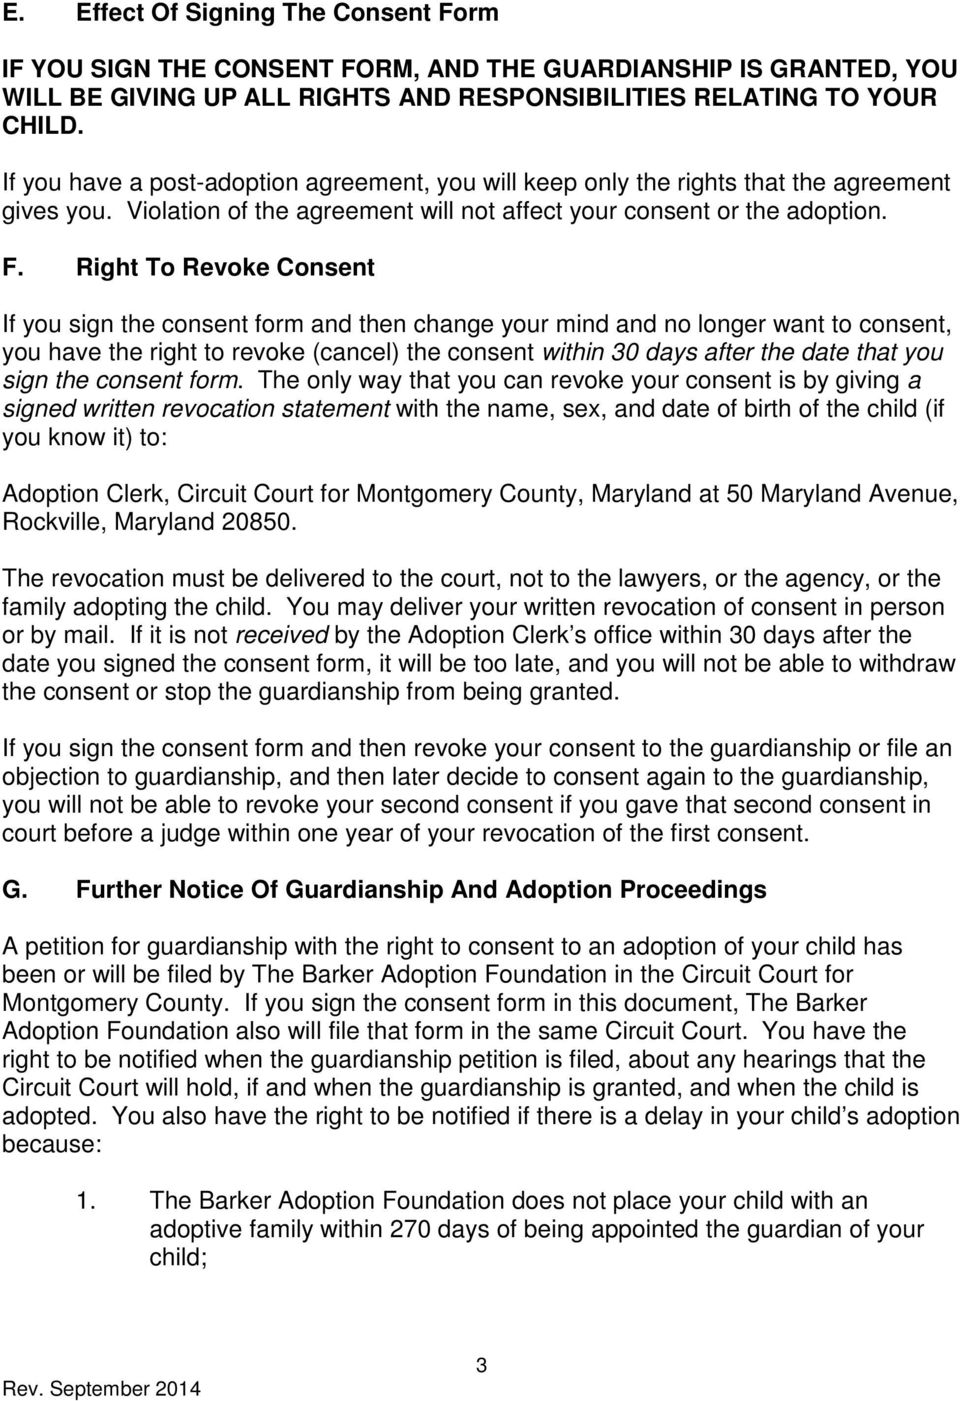 Right To Revoke Consent If you sign the consent form and then change your mind and no longer want to consent, you have the right to revoke (cancel) the consent within 30 days after the date that you